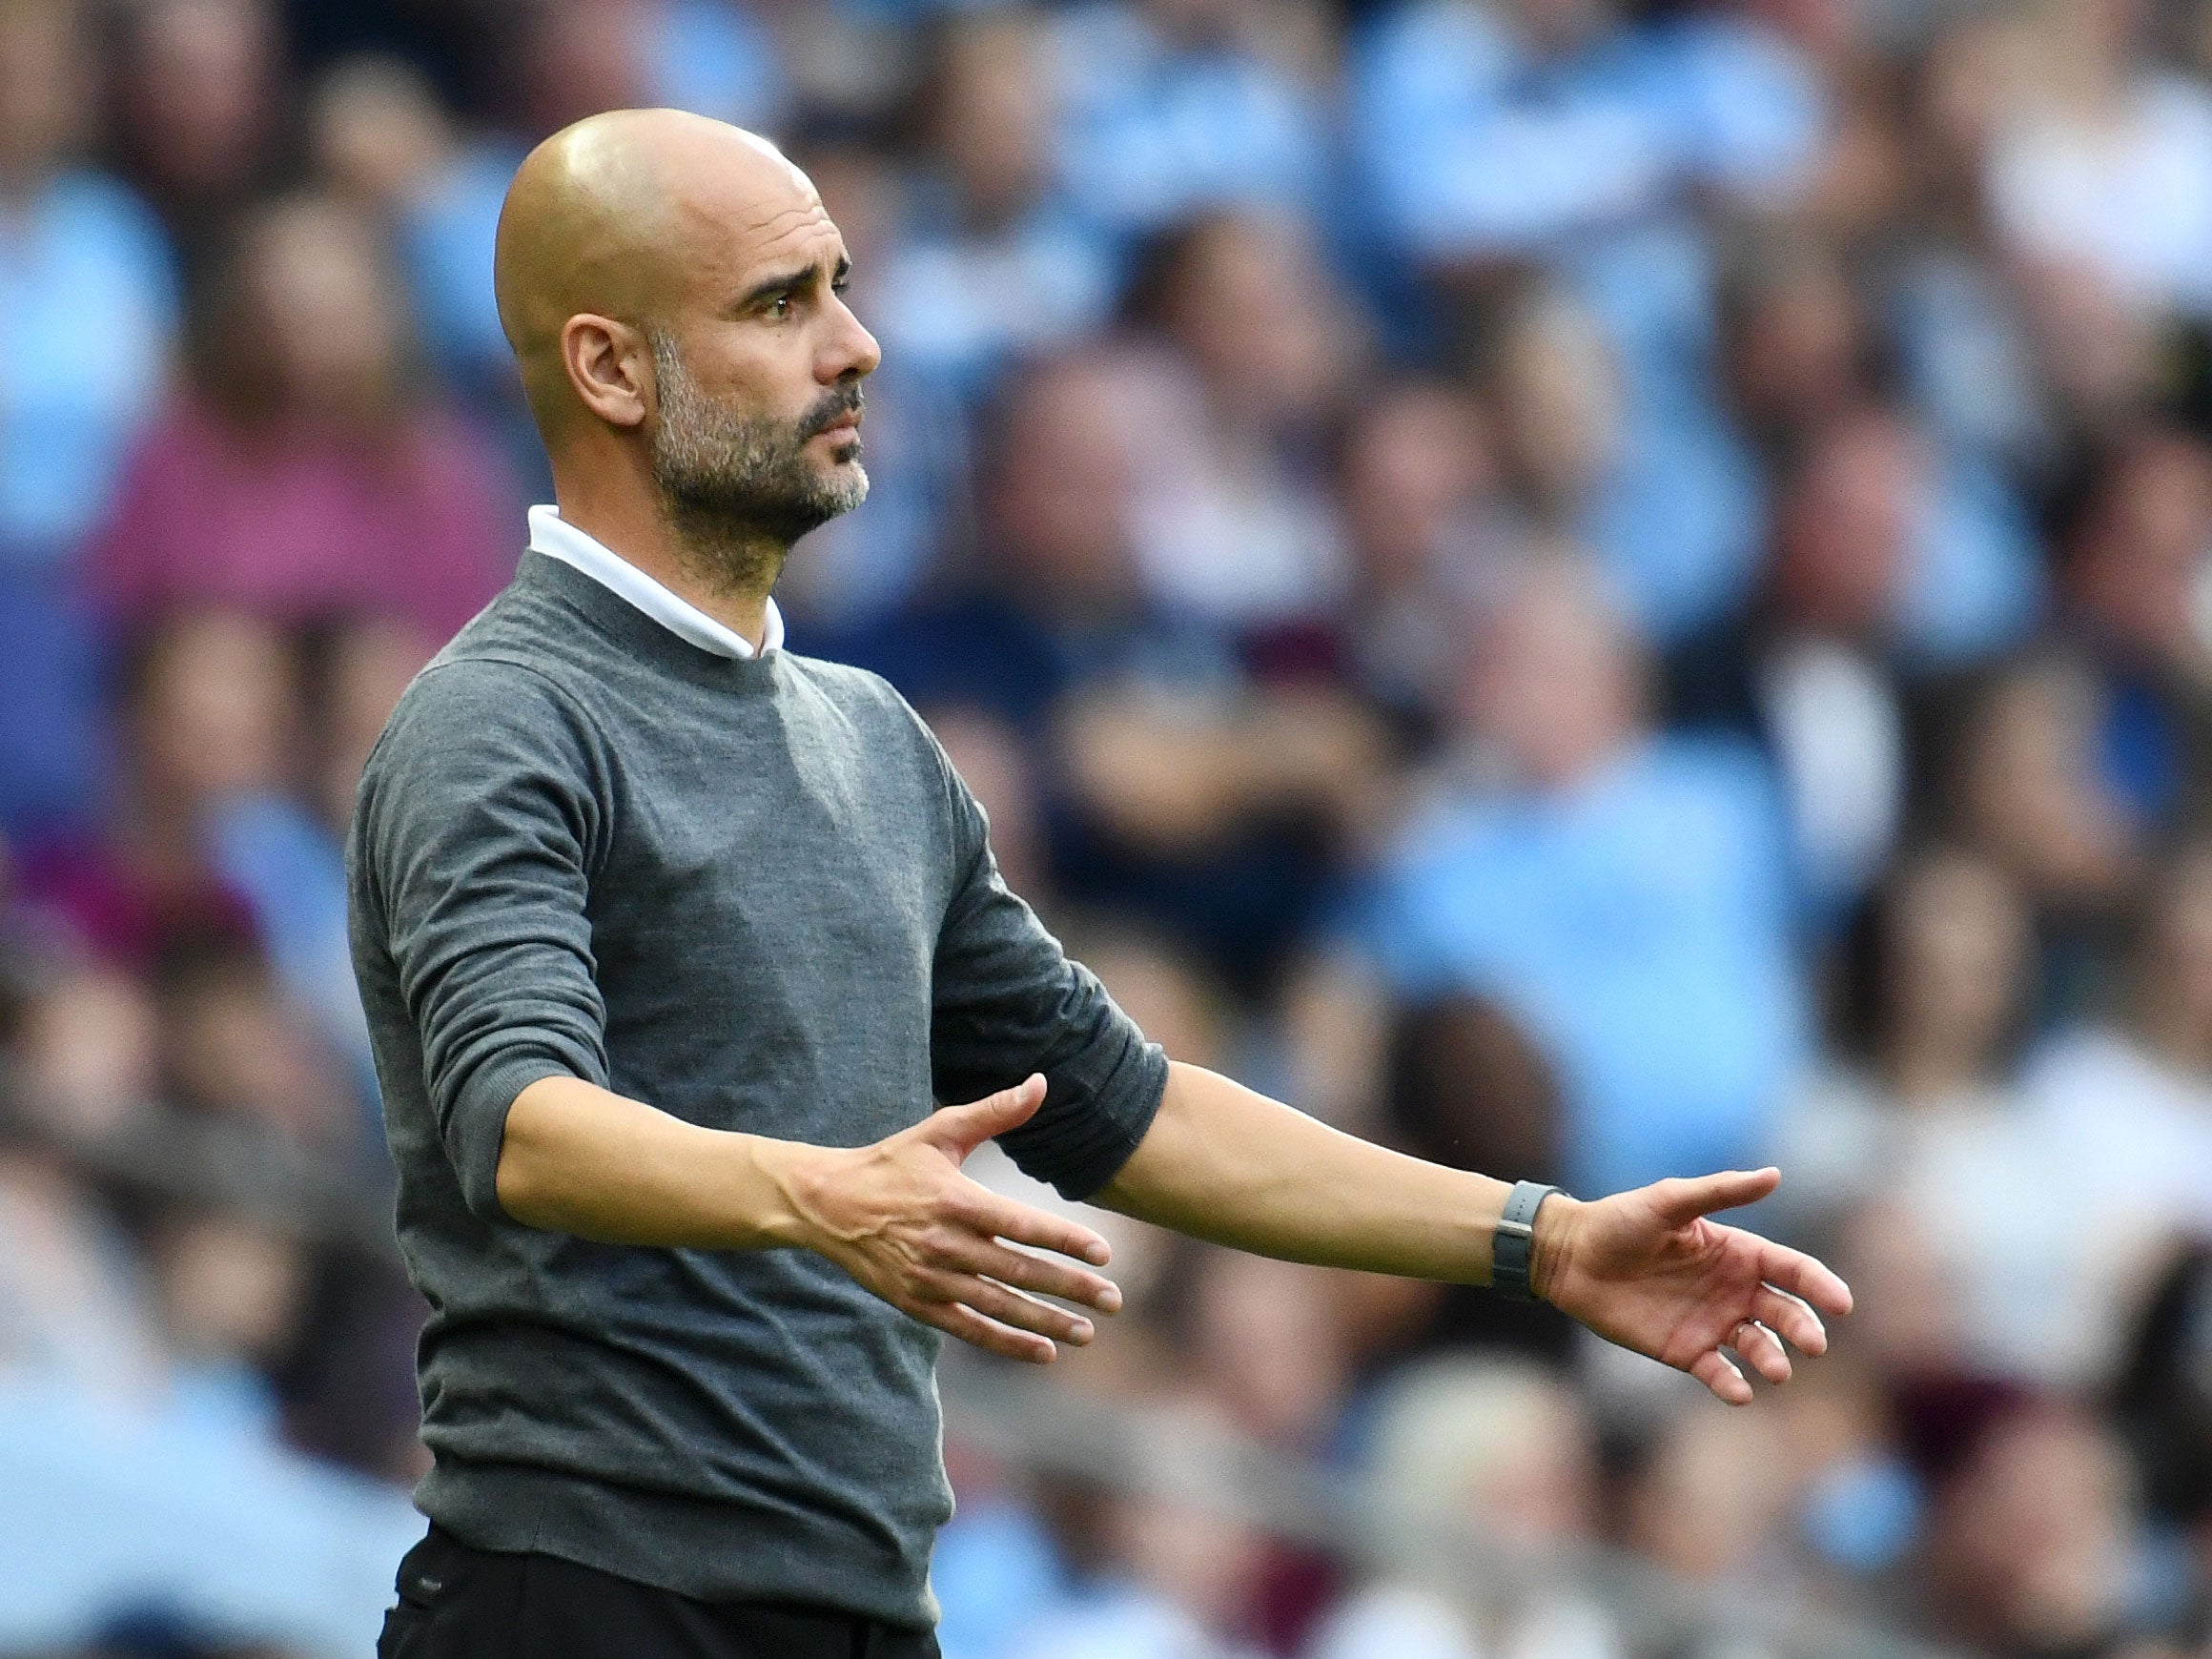 Manchester City vs Brighton, Premier League: What time does it start and where can I watch it?